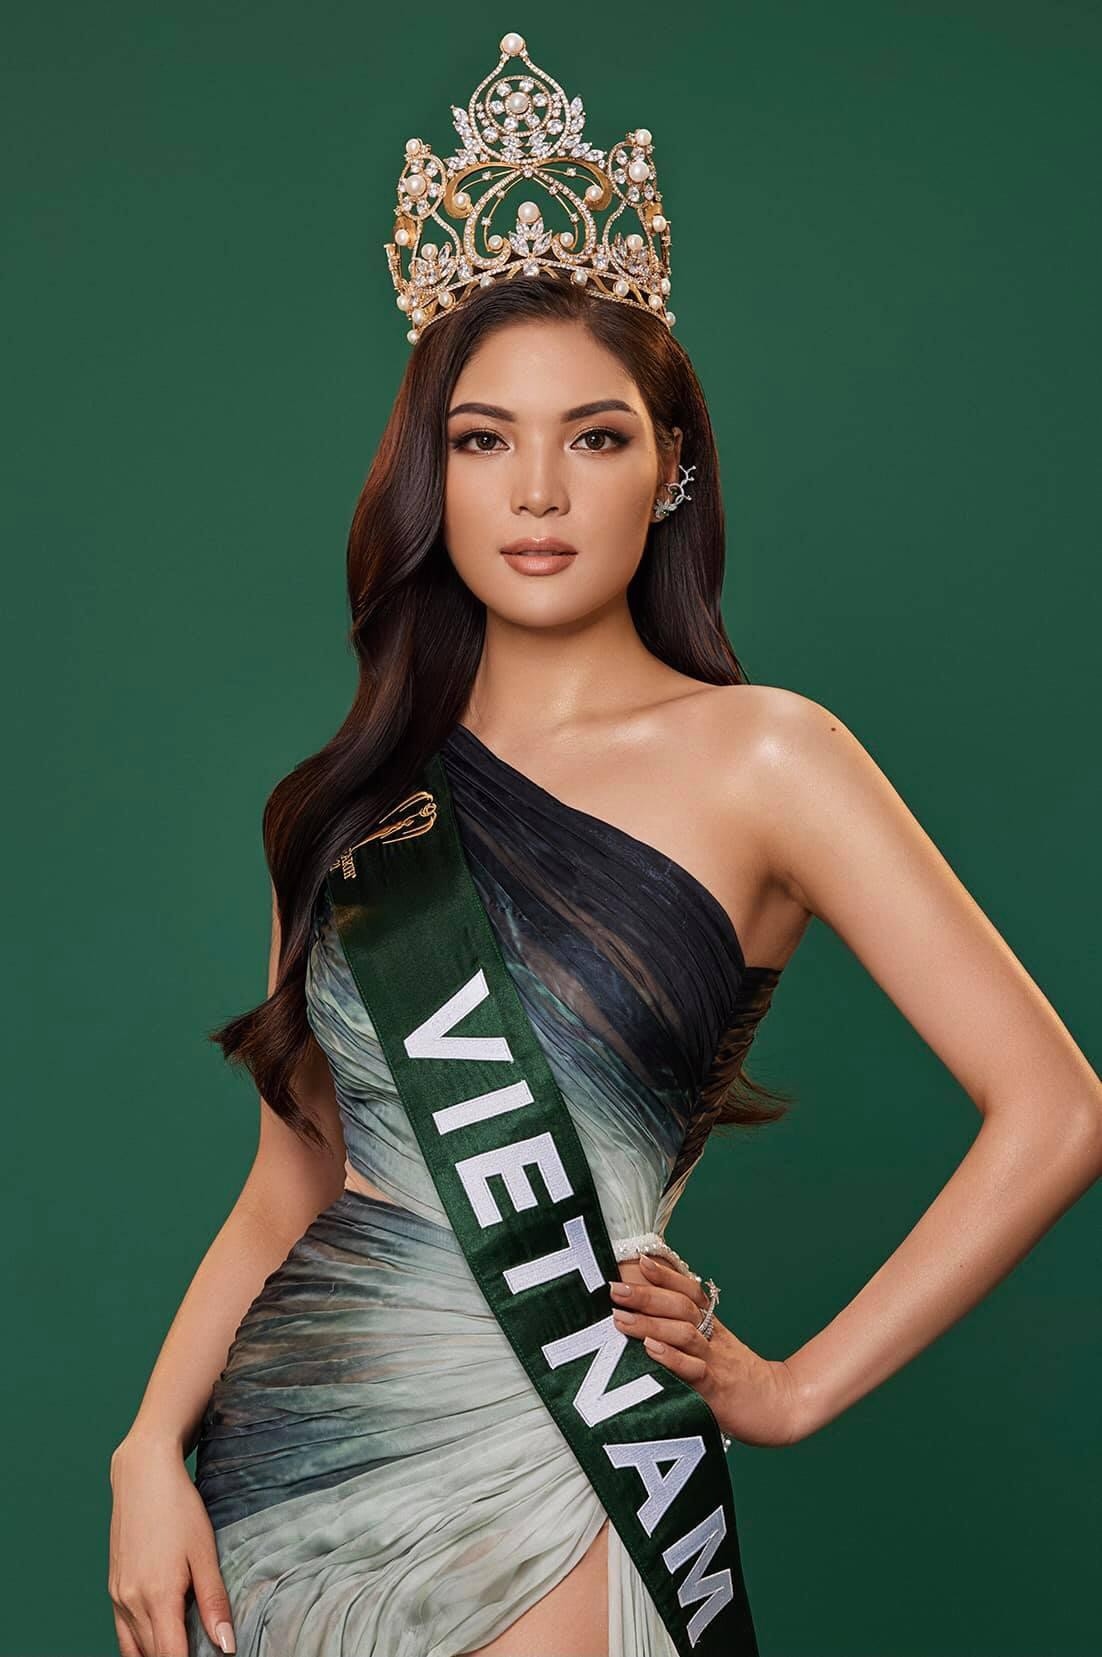 local beauty van anh to vie for miss earth 2021 crown picture 1